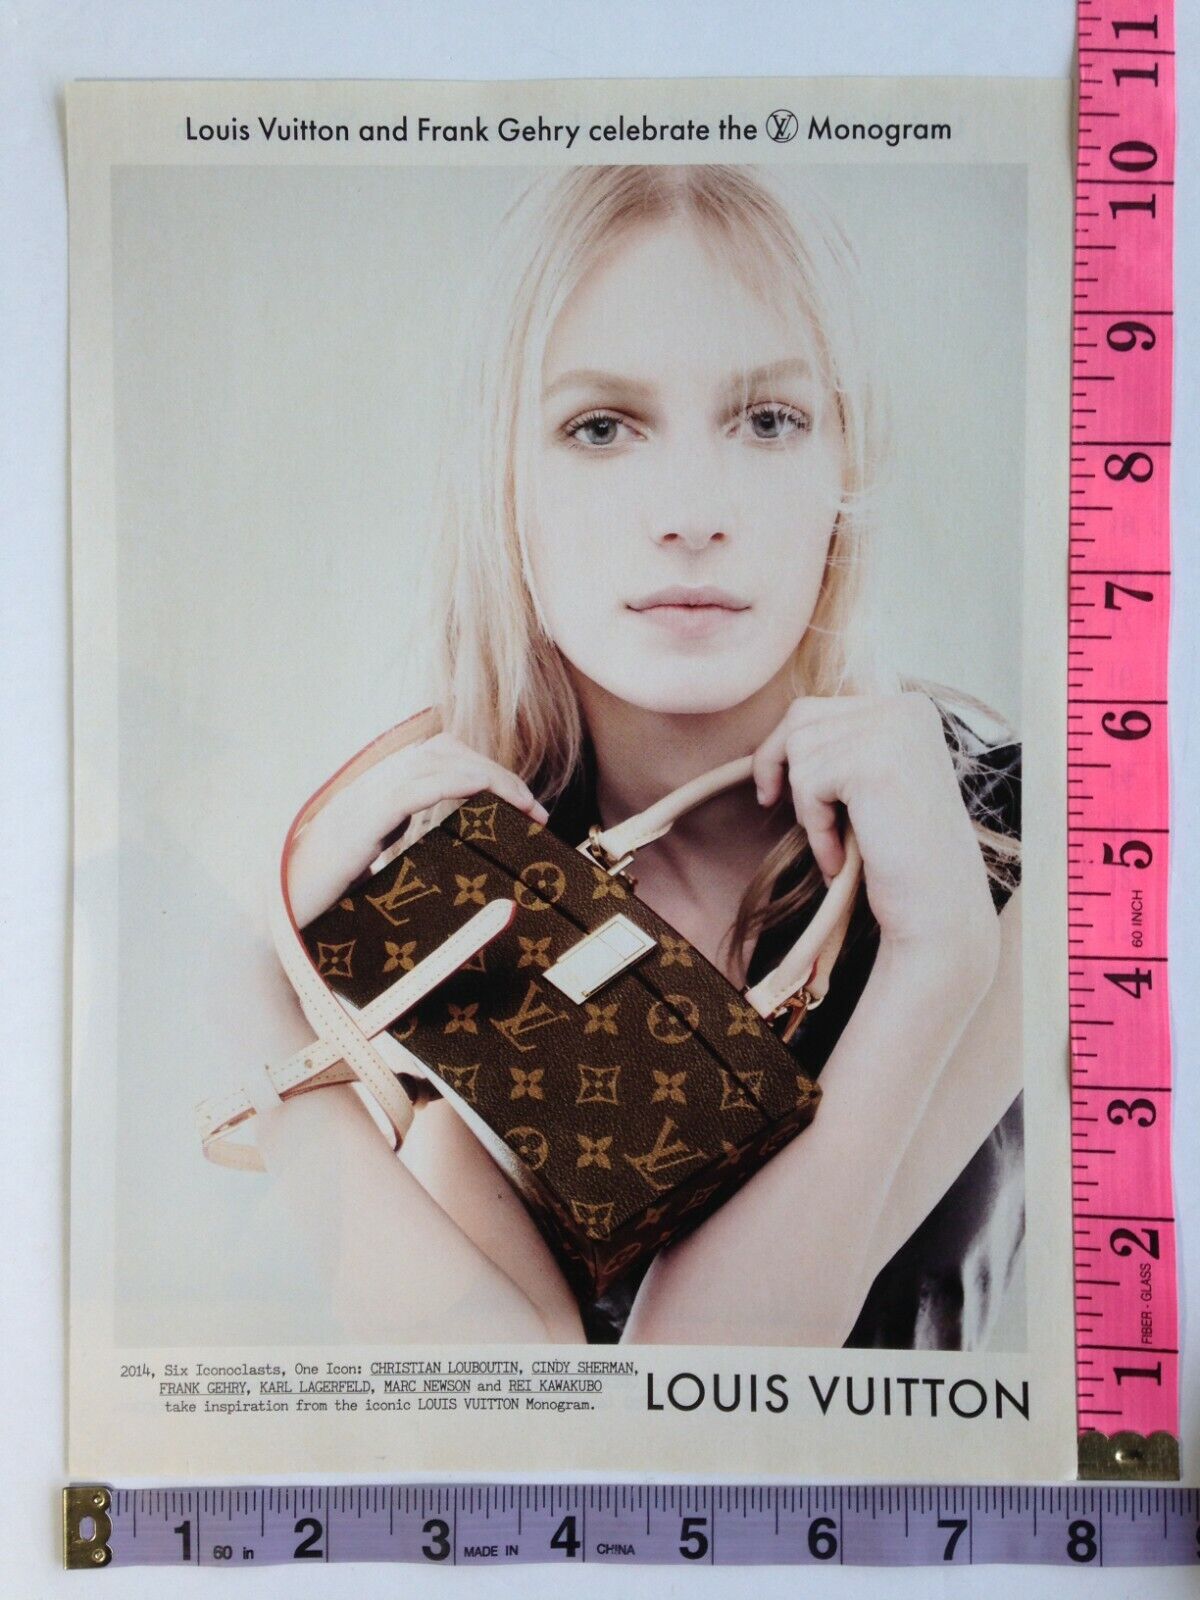 Print Ad - Louis Vuitton Frank Gehry designed bag photo, fashion